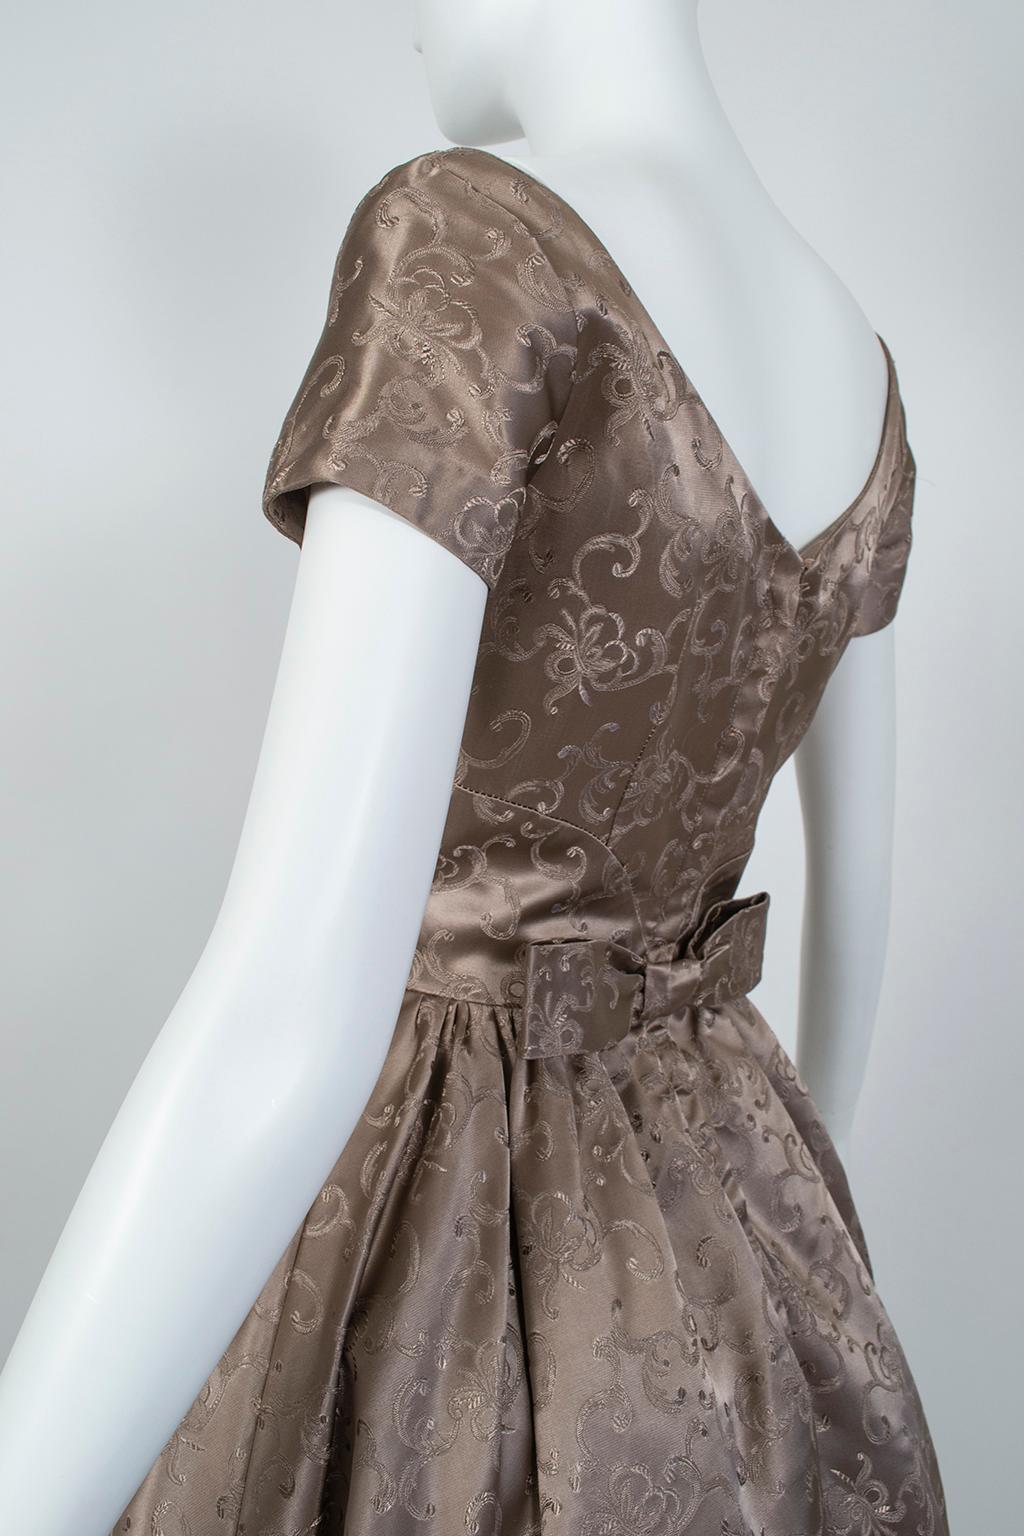 New Look Taupe Silk Sateen Jacquard Cutaway Decolletage Party Dress - S, 1950s In Excellent Condition For Sale In Tucson, AZ